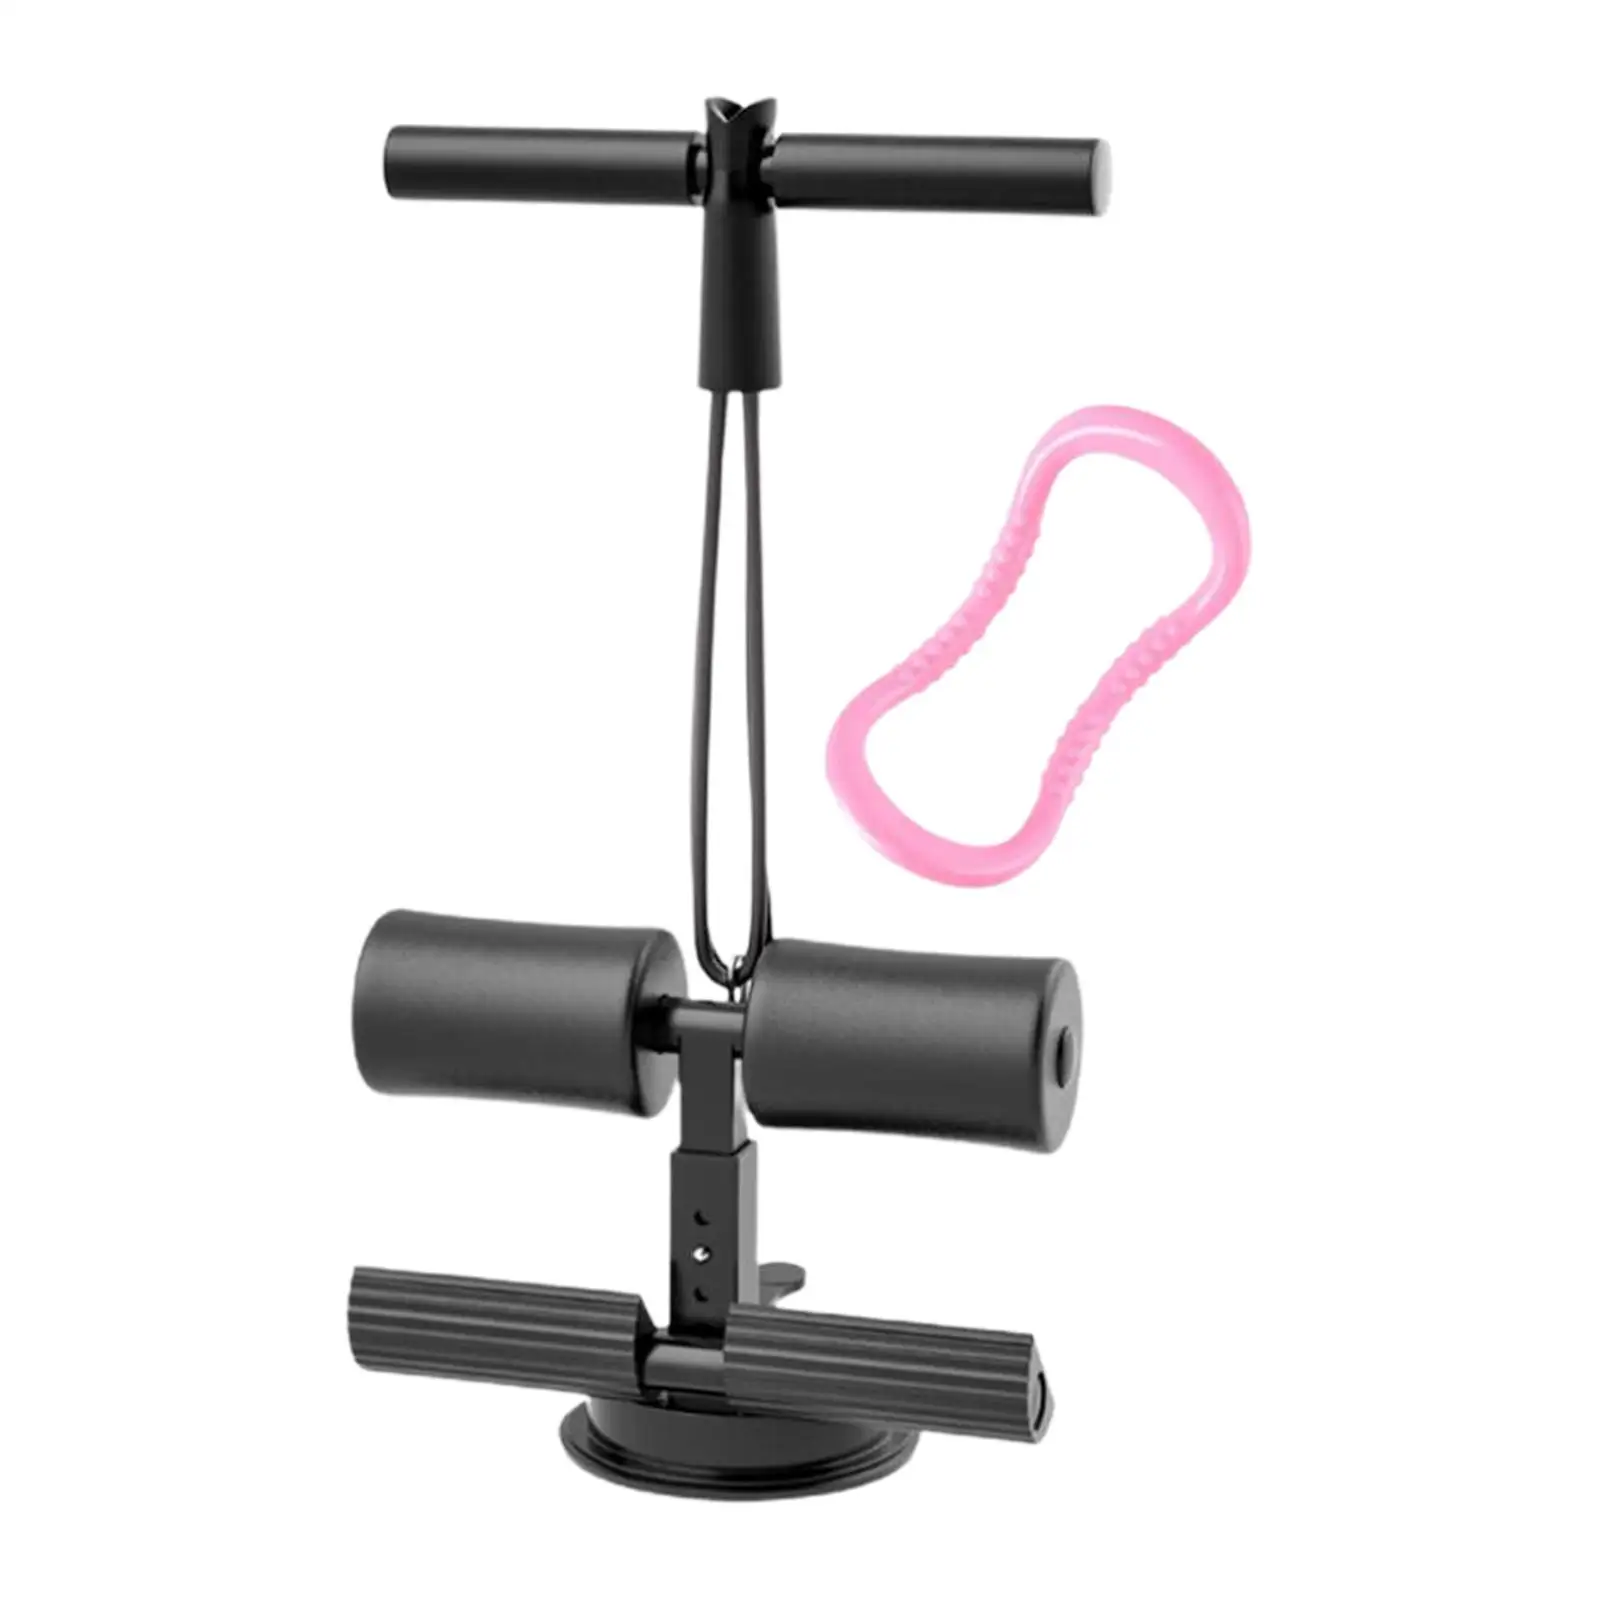 Sit up Bar Suction Cup Adjustable Sit up Assistant Device Machine for Workout